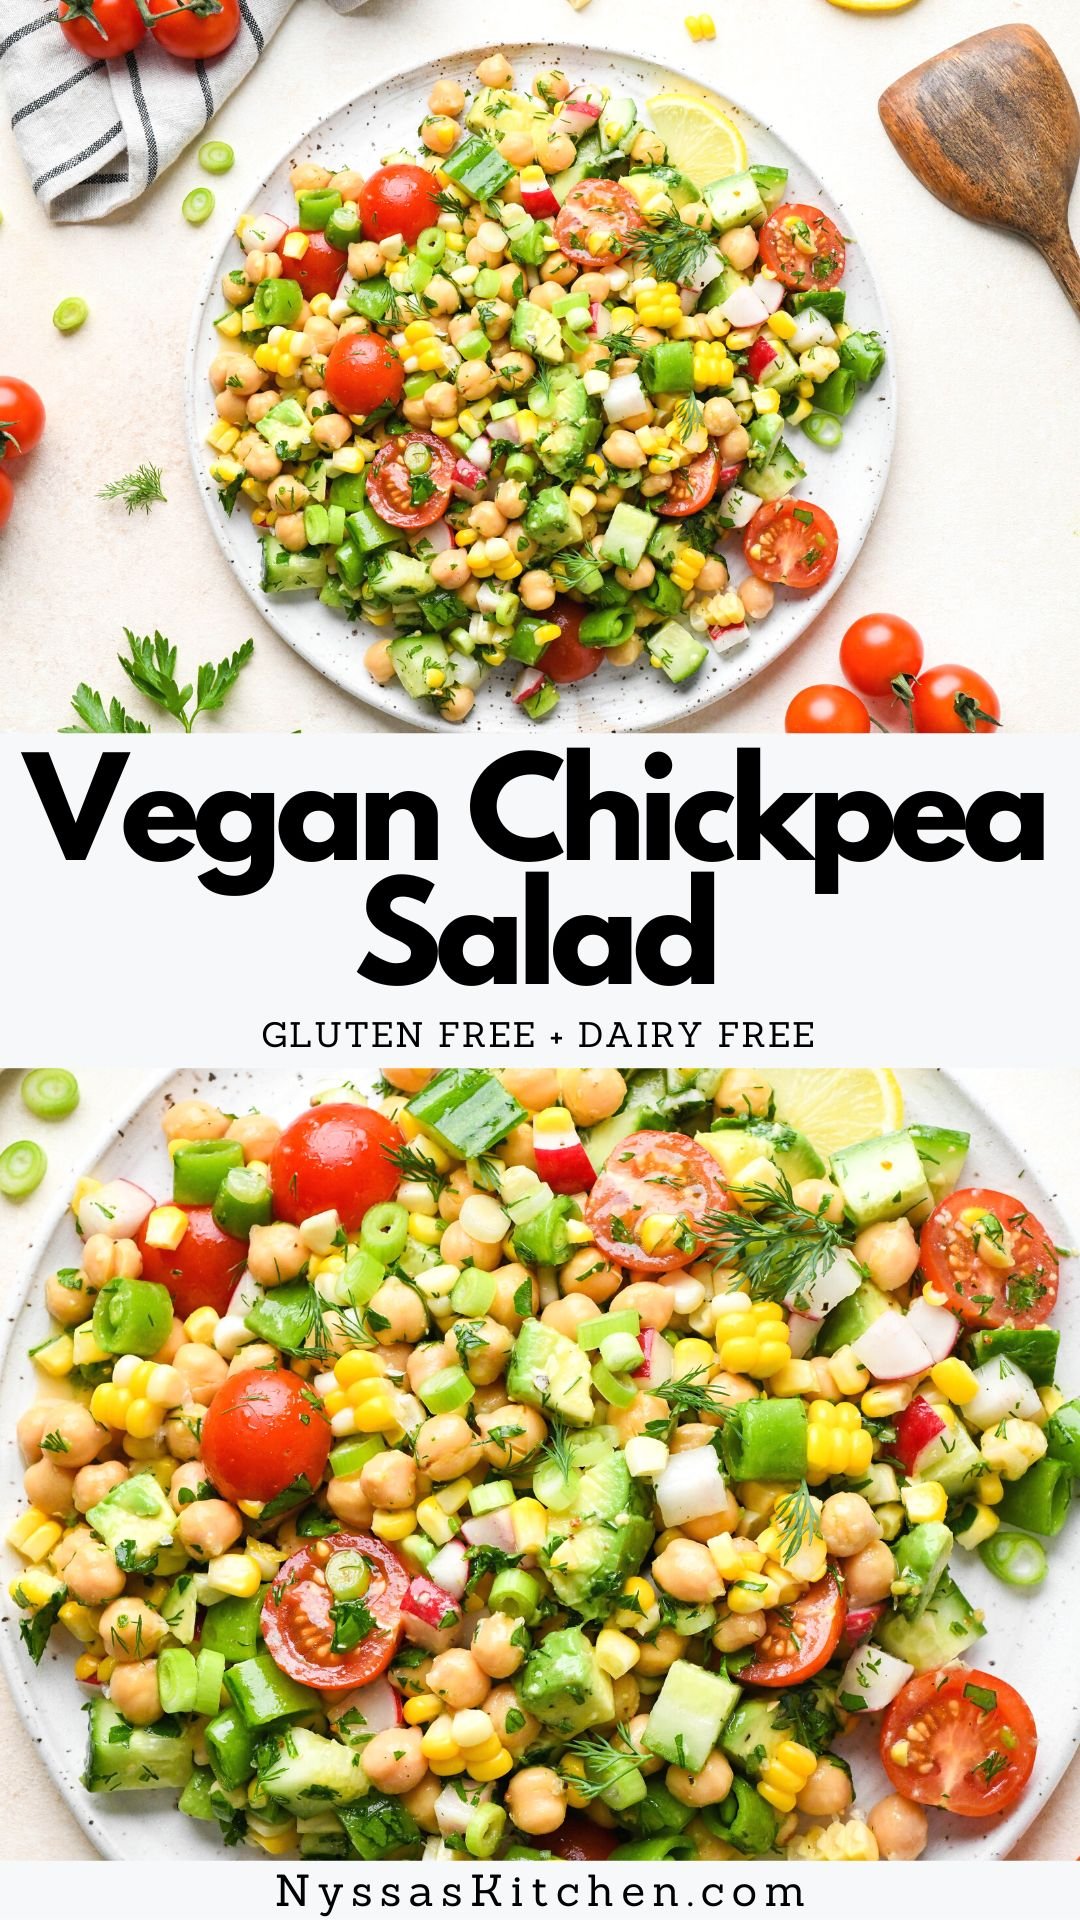 This easy chopped vegan chickpea salad is made with a rainbow of fresh veggies, creamy avocado, dill, parsley, green onions, and a simple lemony dressing. A healthy and unique recipe that's perfect for a quick lunch, summer BBQ, or potluck! Vegan, vegetarian, dairy free, gluten free!